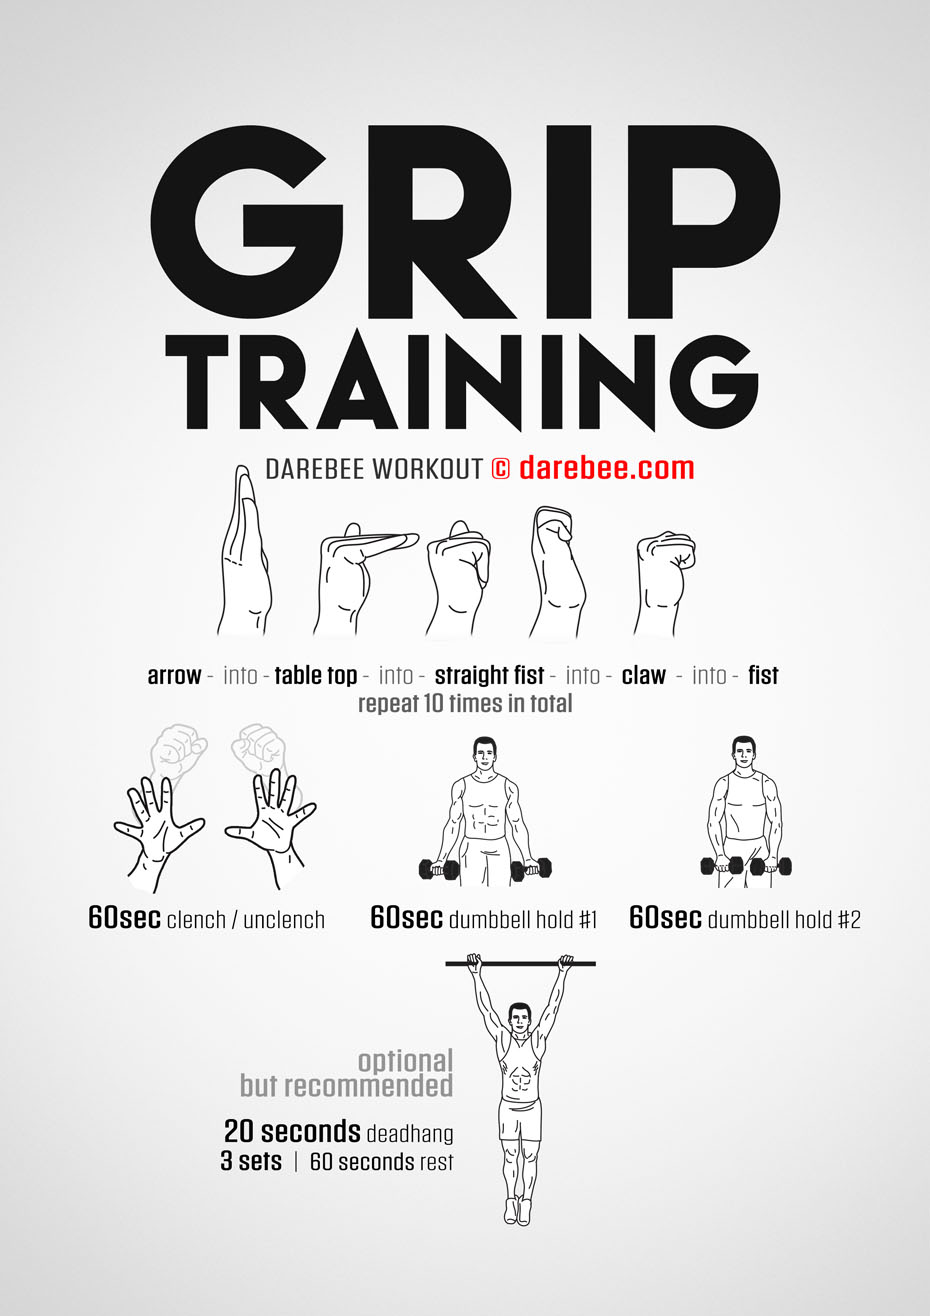 Grip Training is a Darebee home-fitness grip strength workout that will help you become stronger and healthier.